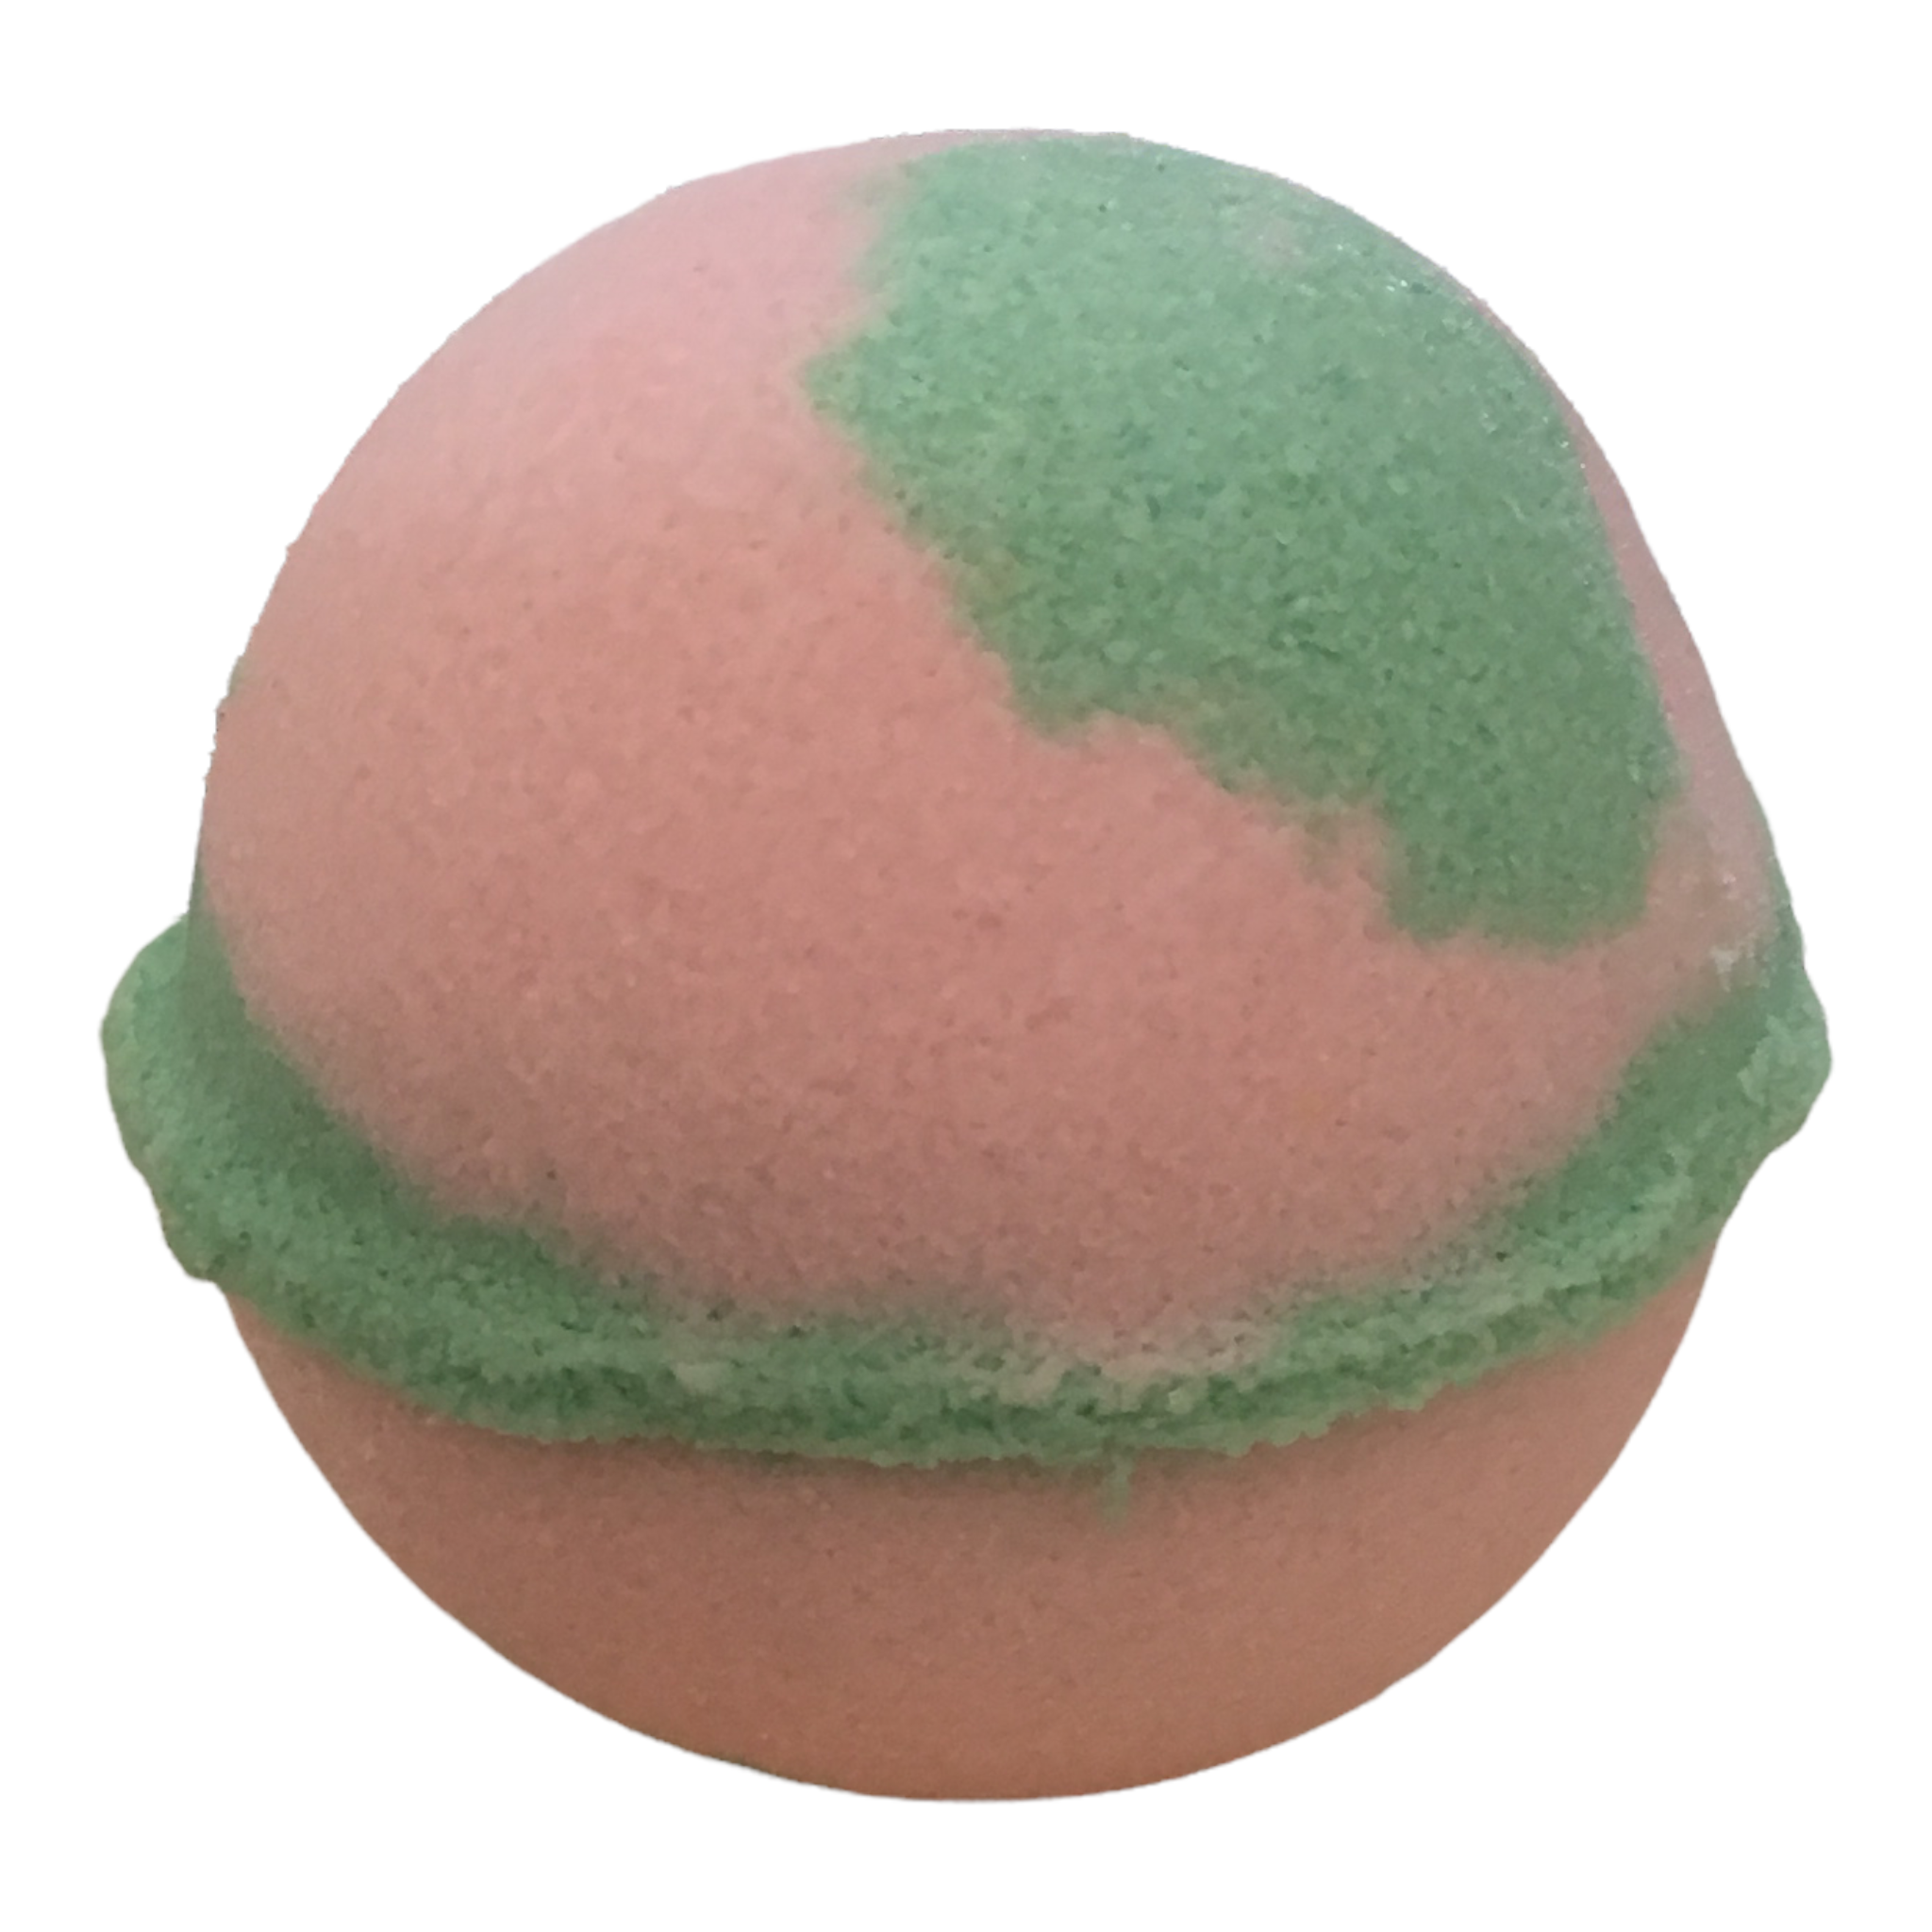 Valley in Bloom pink and green colored bath bomb